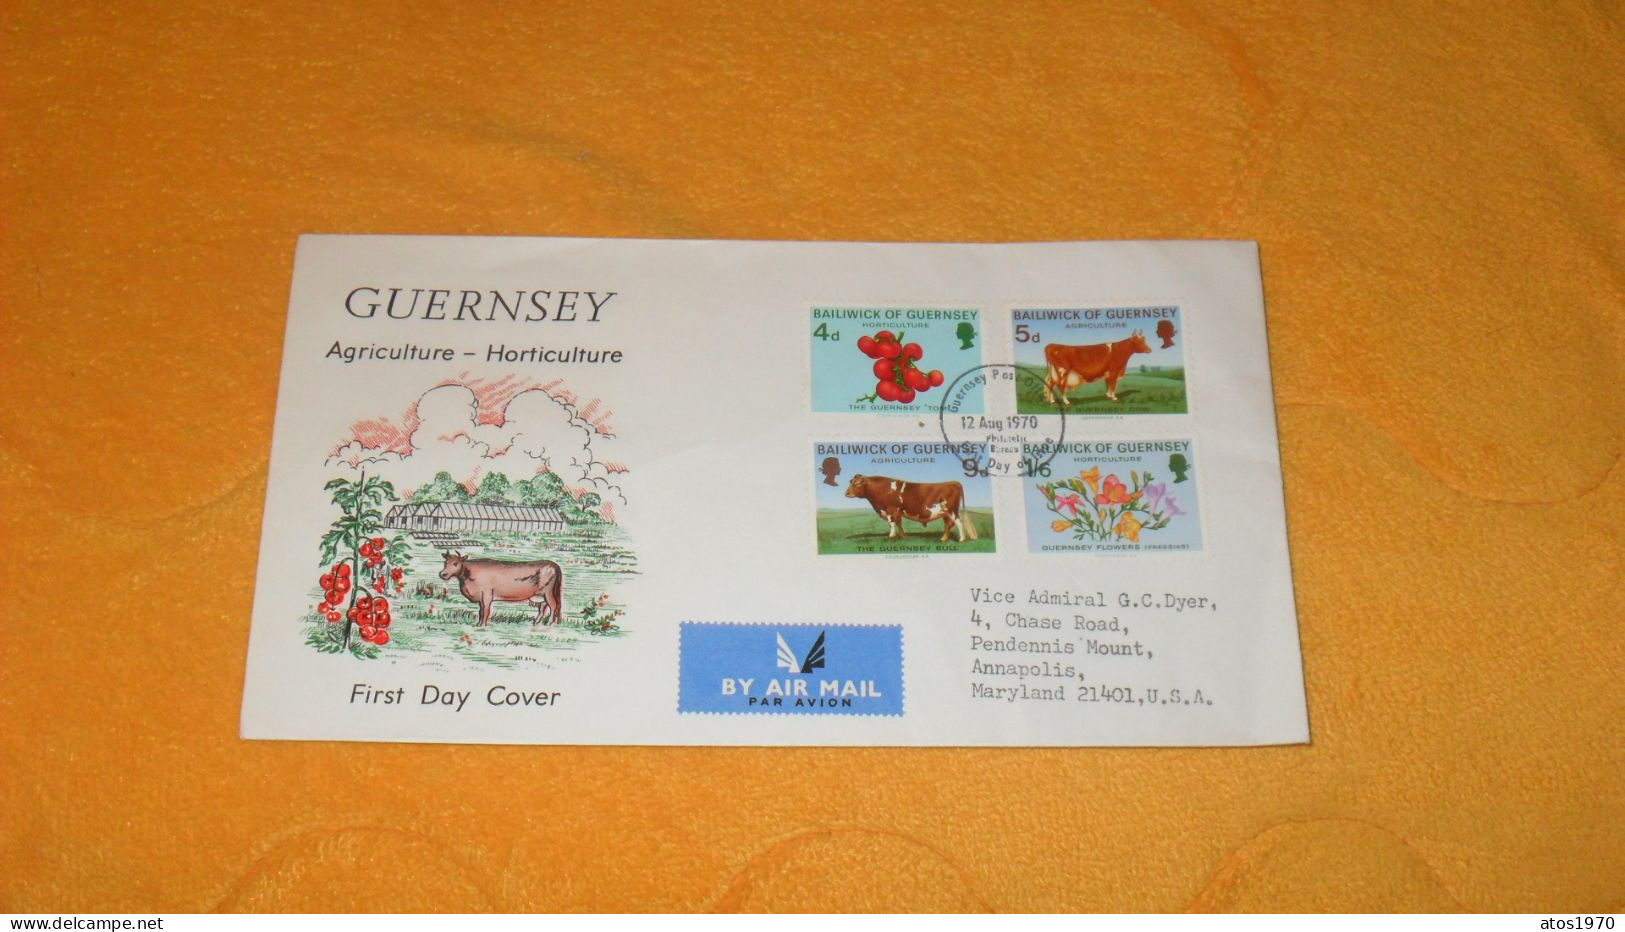 ENVELOPPE FDC DE 1970../ GUERNSEY AGRICULTURE HORTICULTURE...CACHET + TIMBRES X4 - 1952-1971 Pre-Decimal Issues